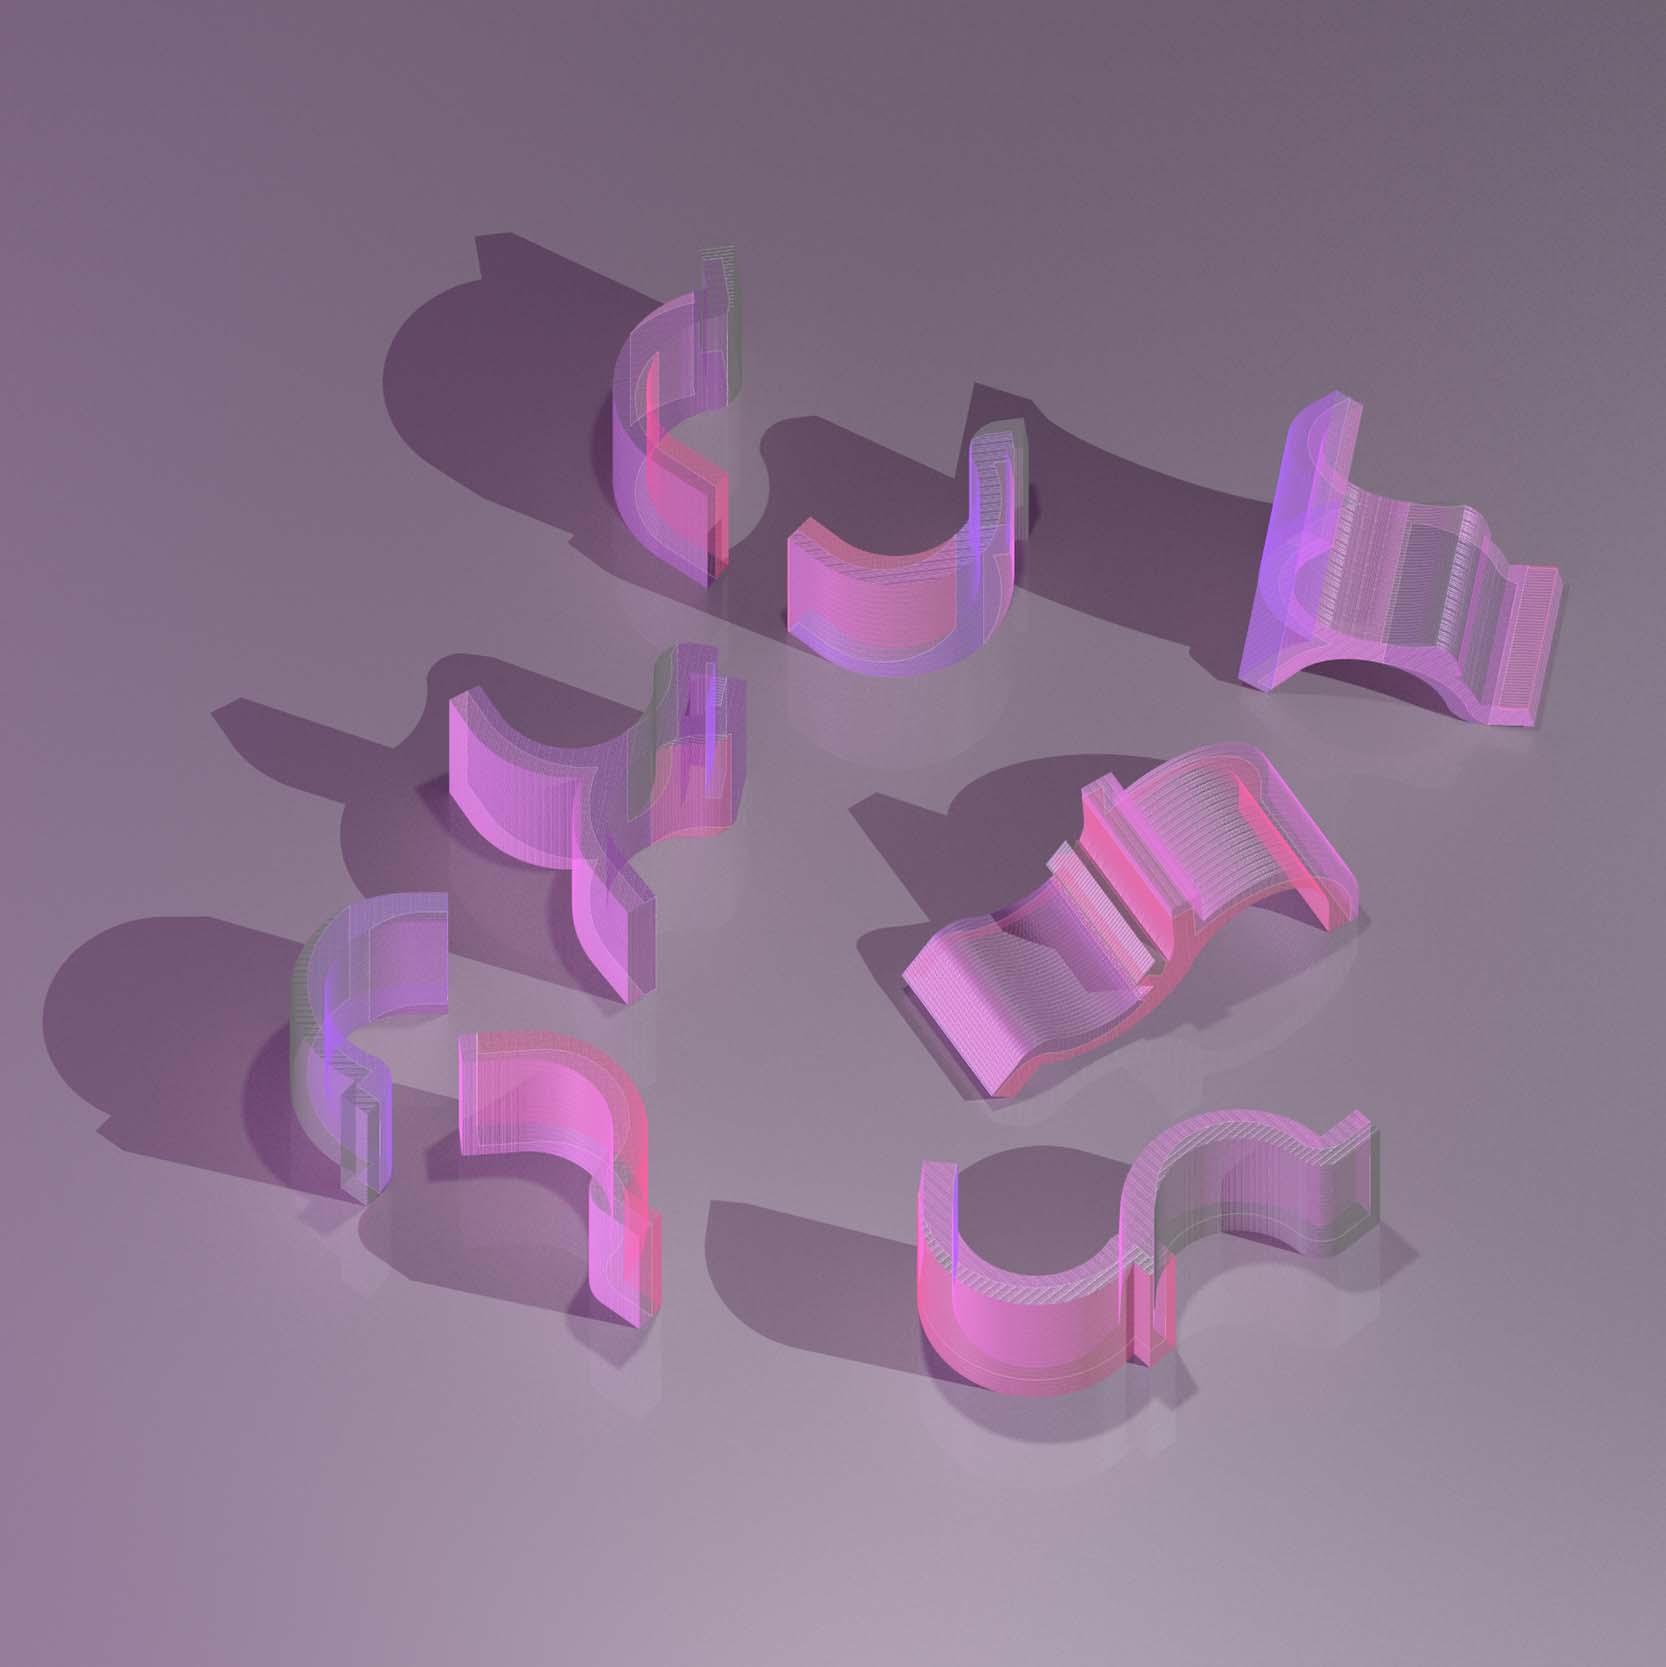 Rendering of 8 pink curved joint-like elements